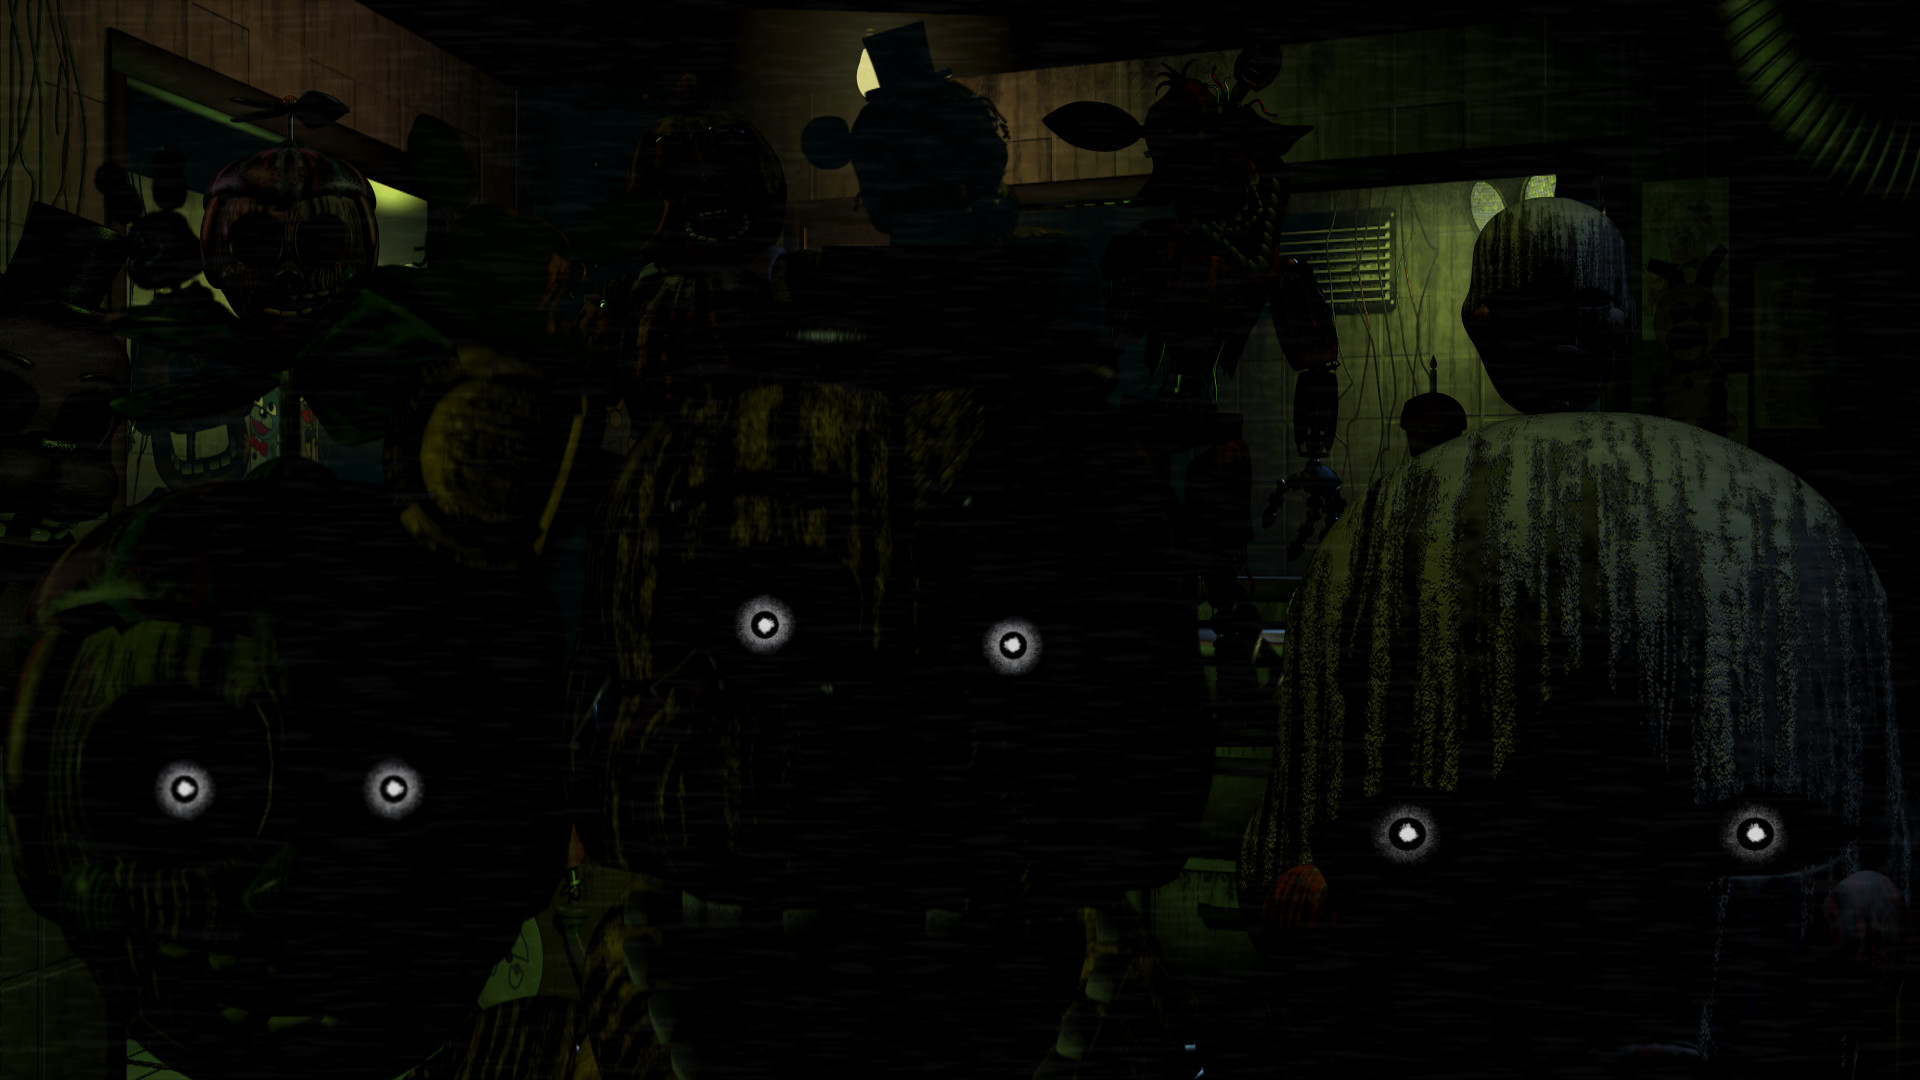 1920x1080 Five Nights at Freddy's 3 Hallucinations Wallpaper